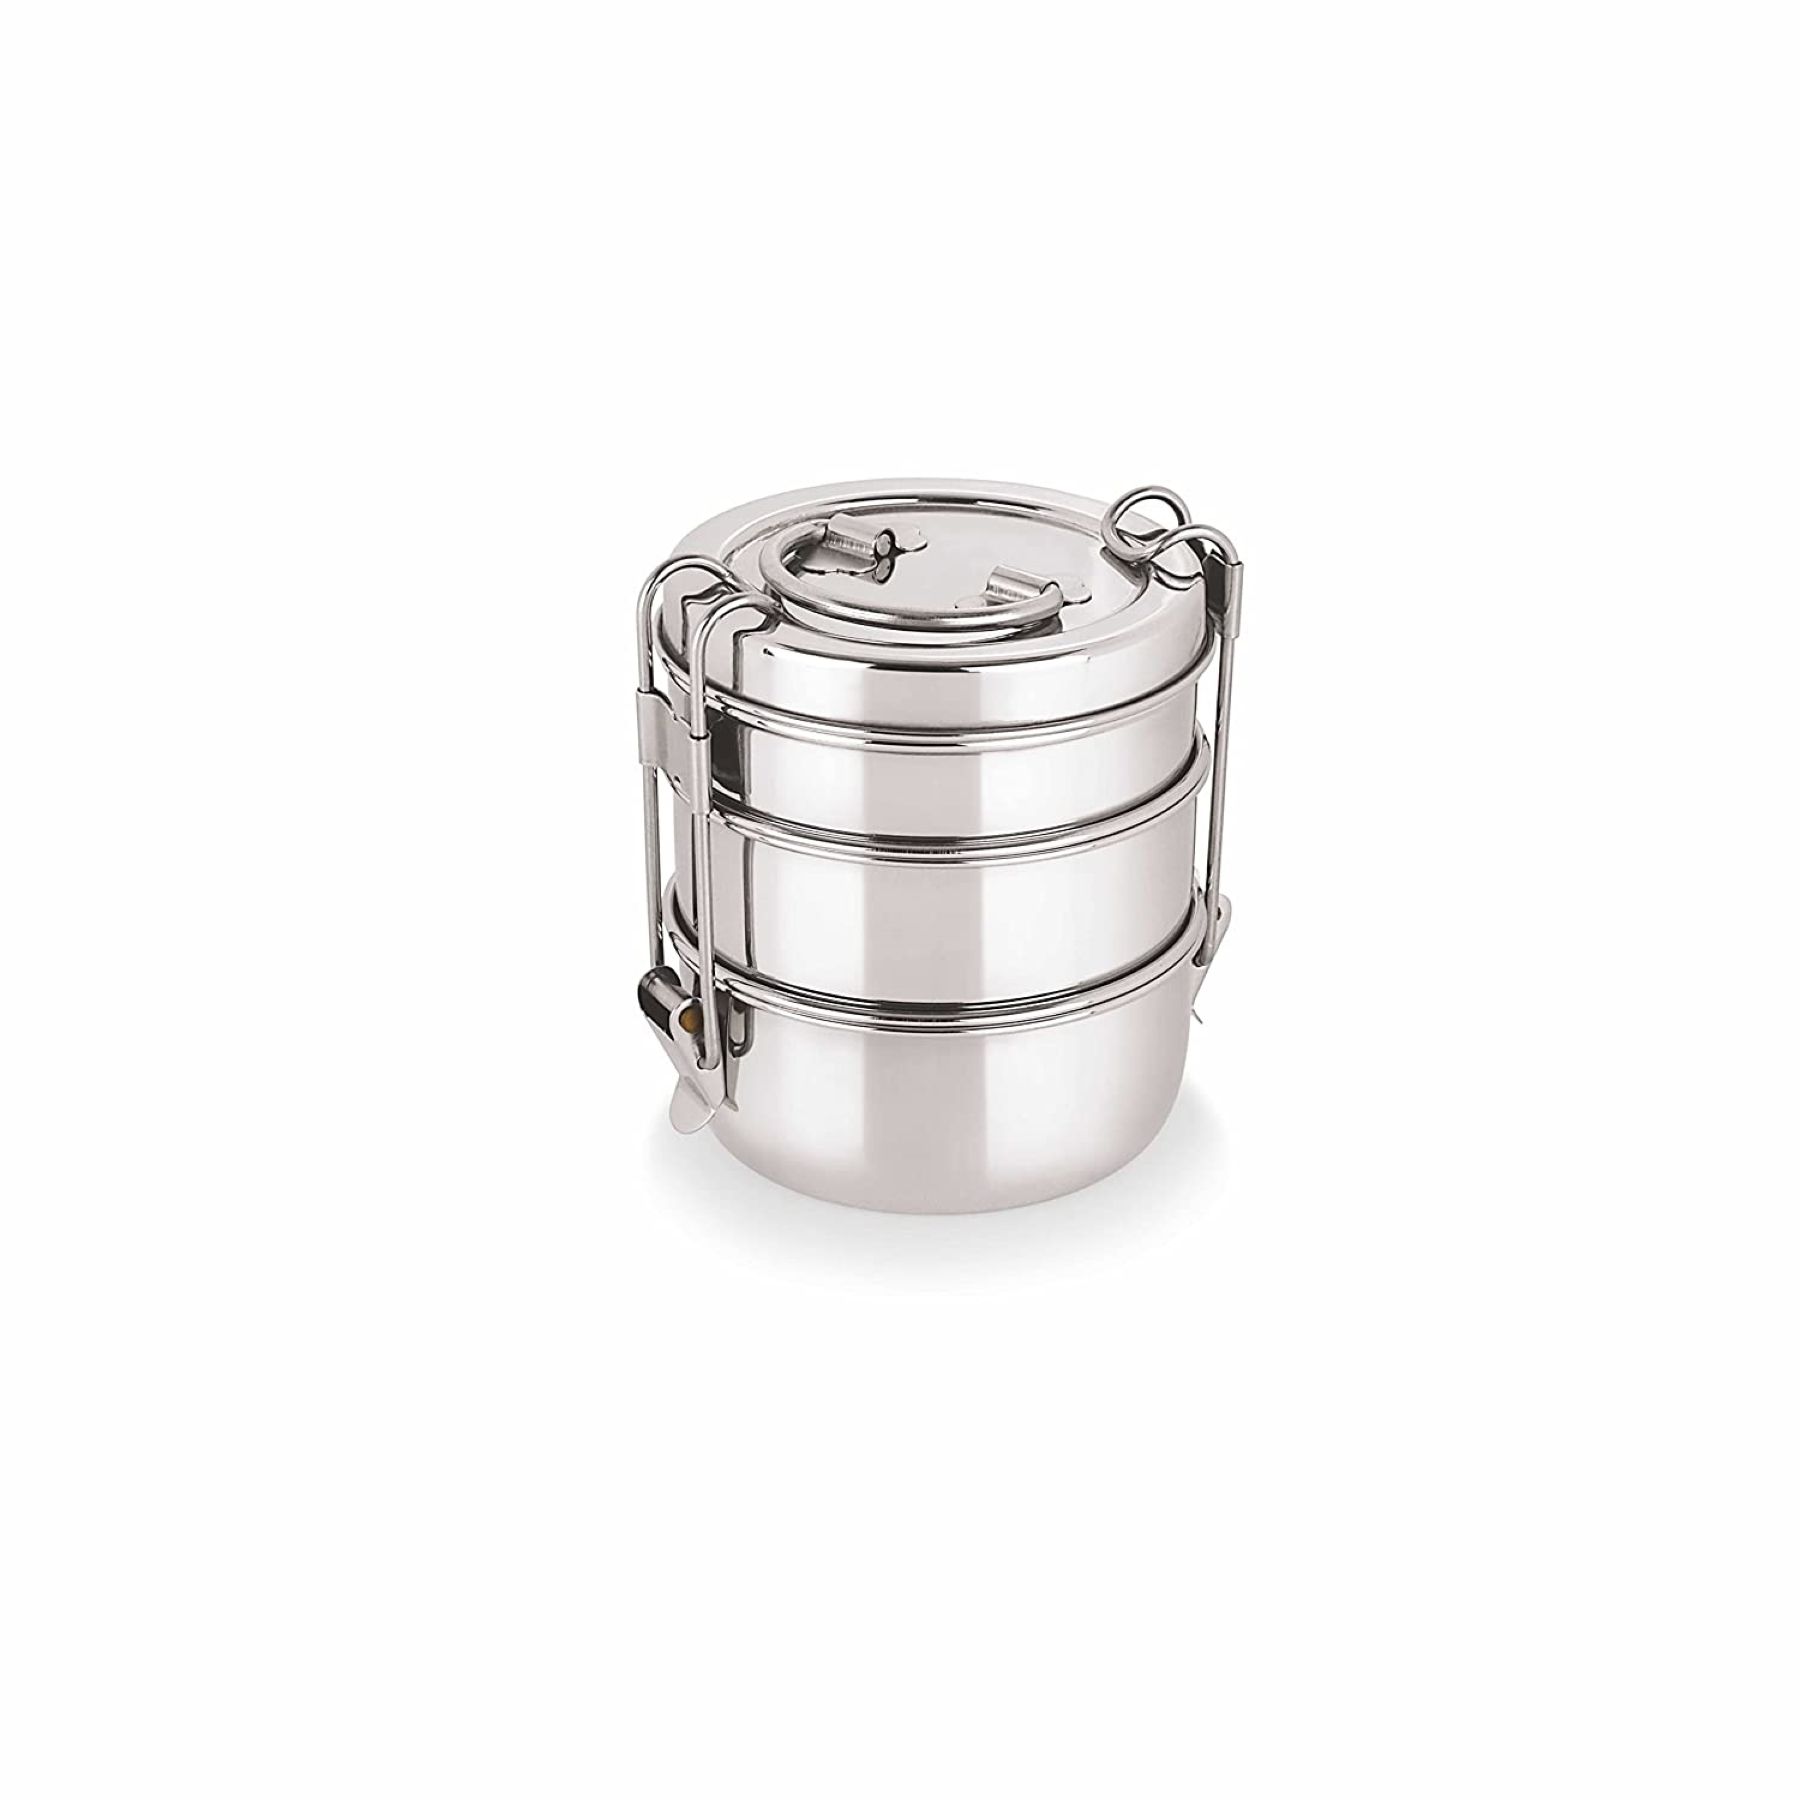     			Neelam Stainless Steel Two Compartment Tiffin Box with Lid, 800 ml, Silver